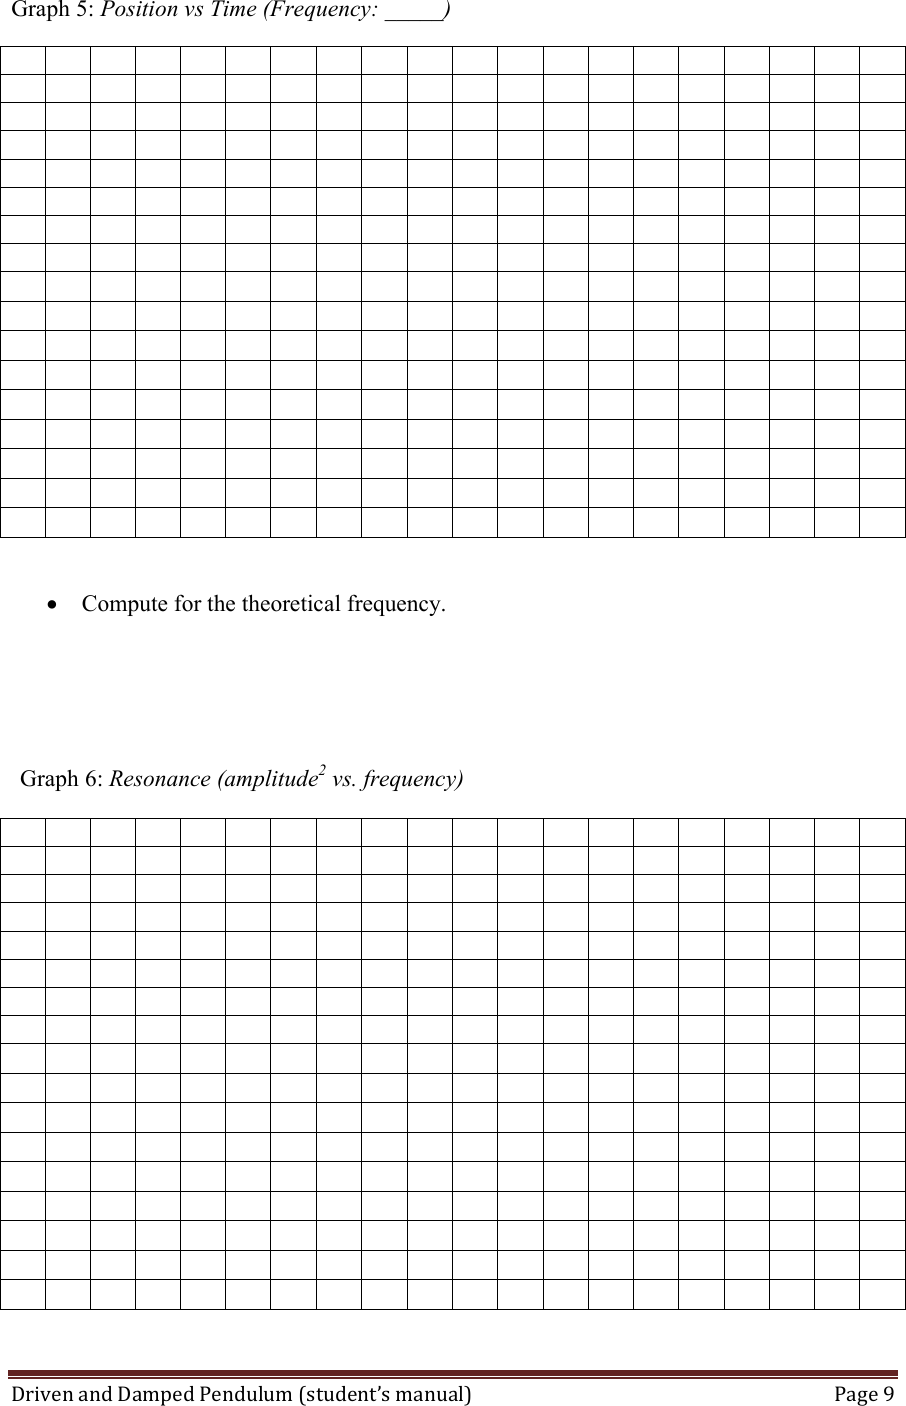 Page 9 of 10 - 01 Driven And Damped Pendulum Experiment Manual